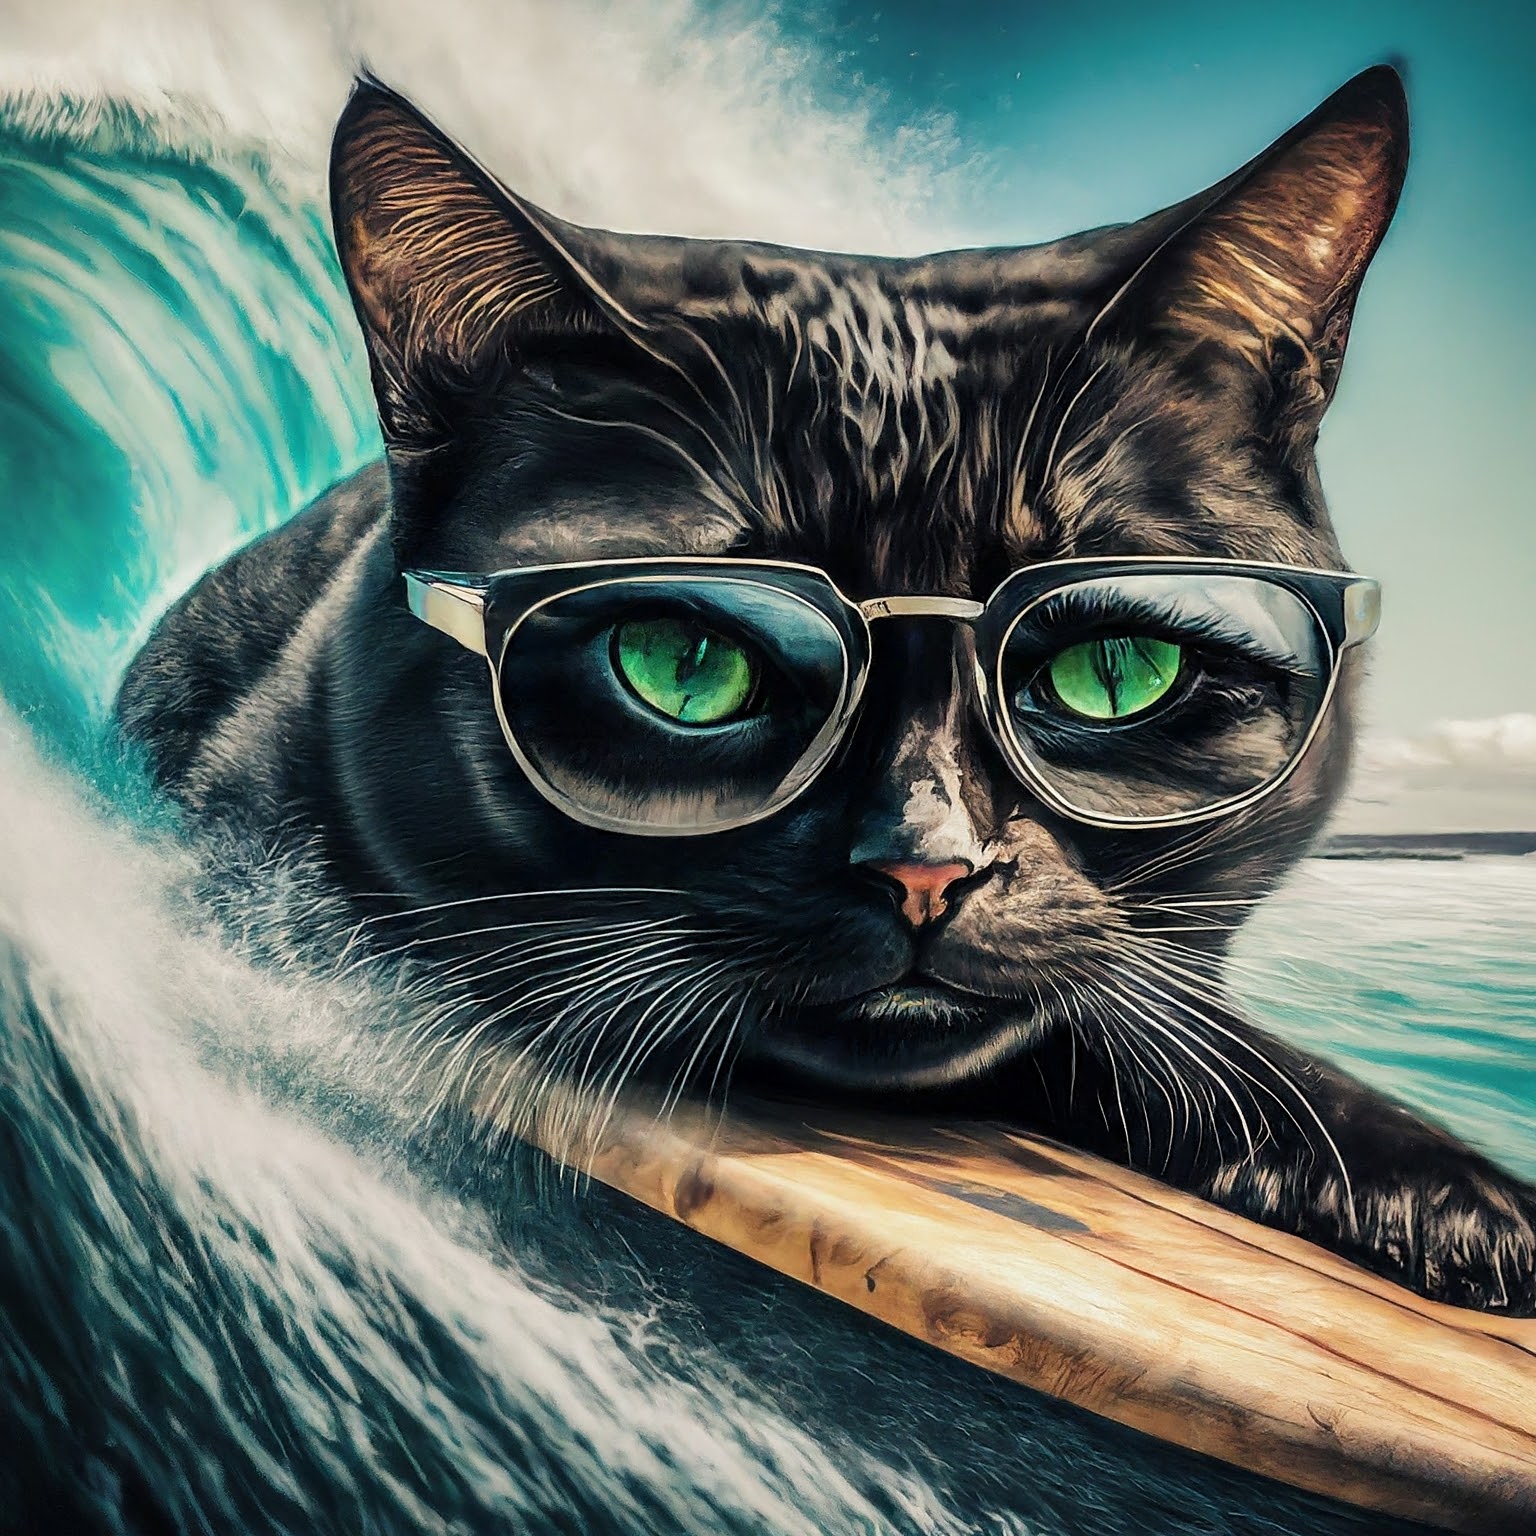 A Cat Surfer Riding On A Surfboard.